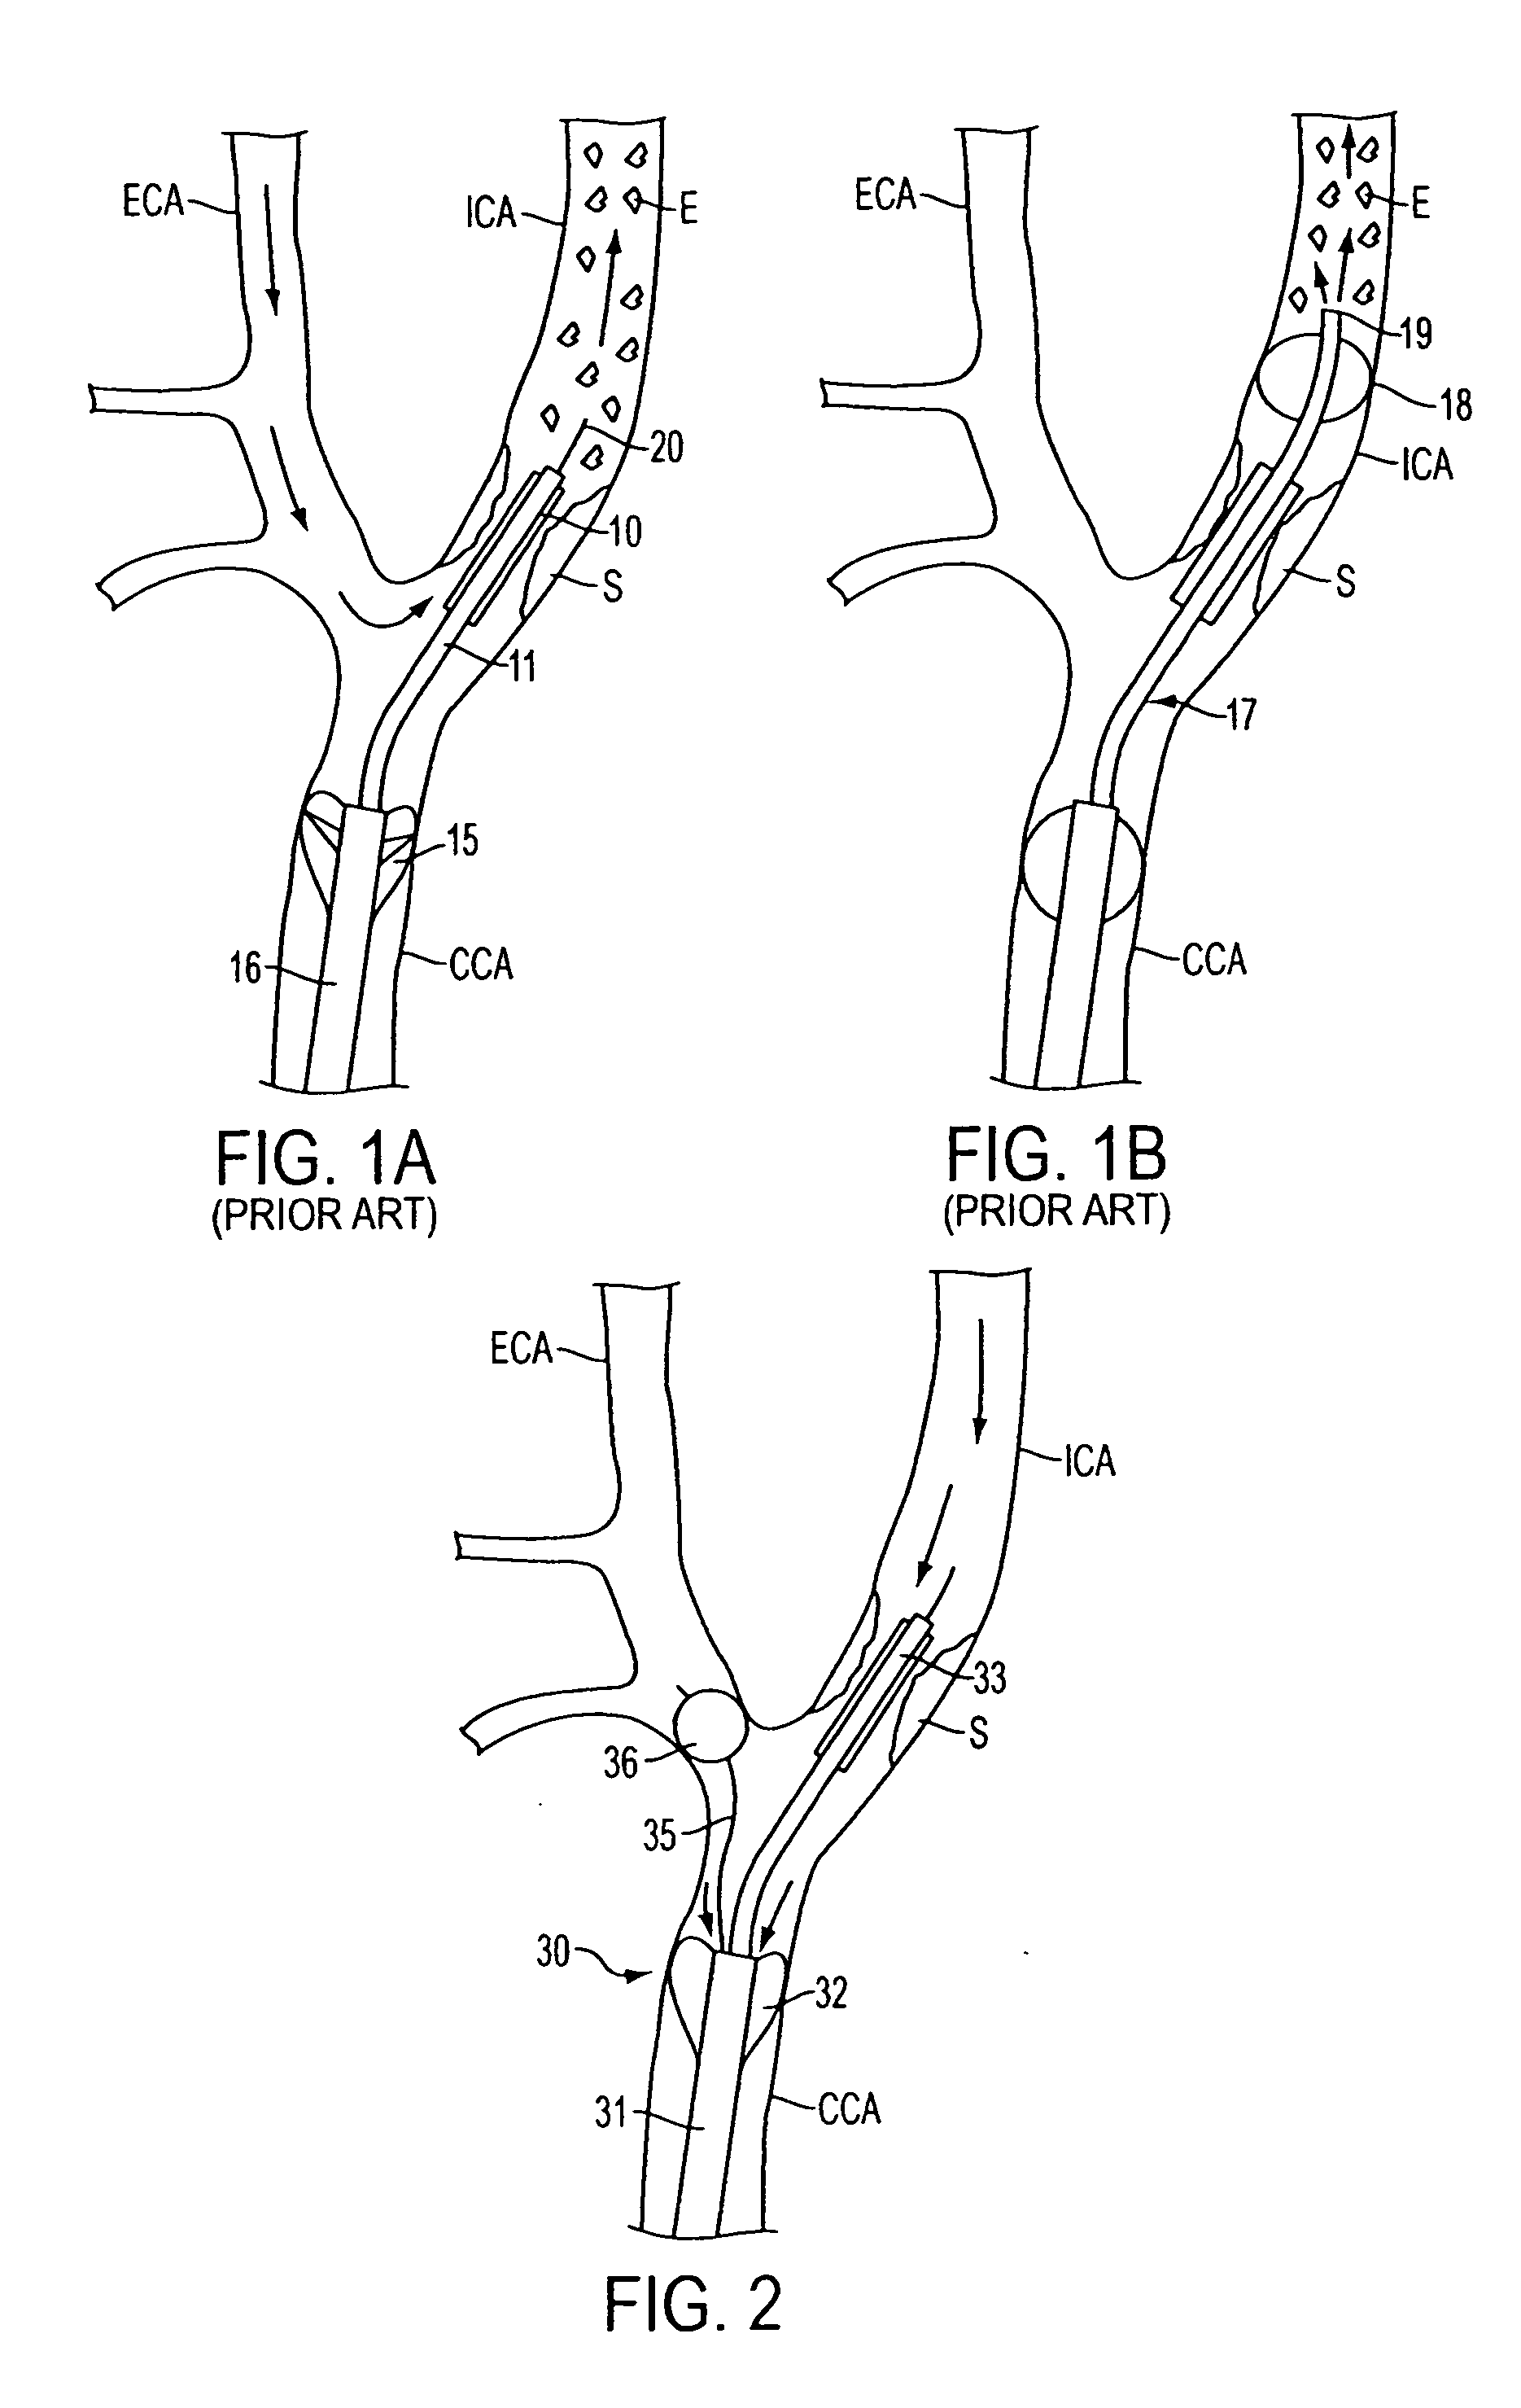 Apparatus and methods for reducing embolization during treatment of carotid artery disease